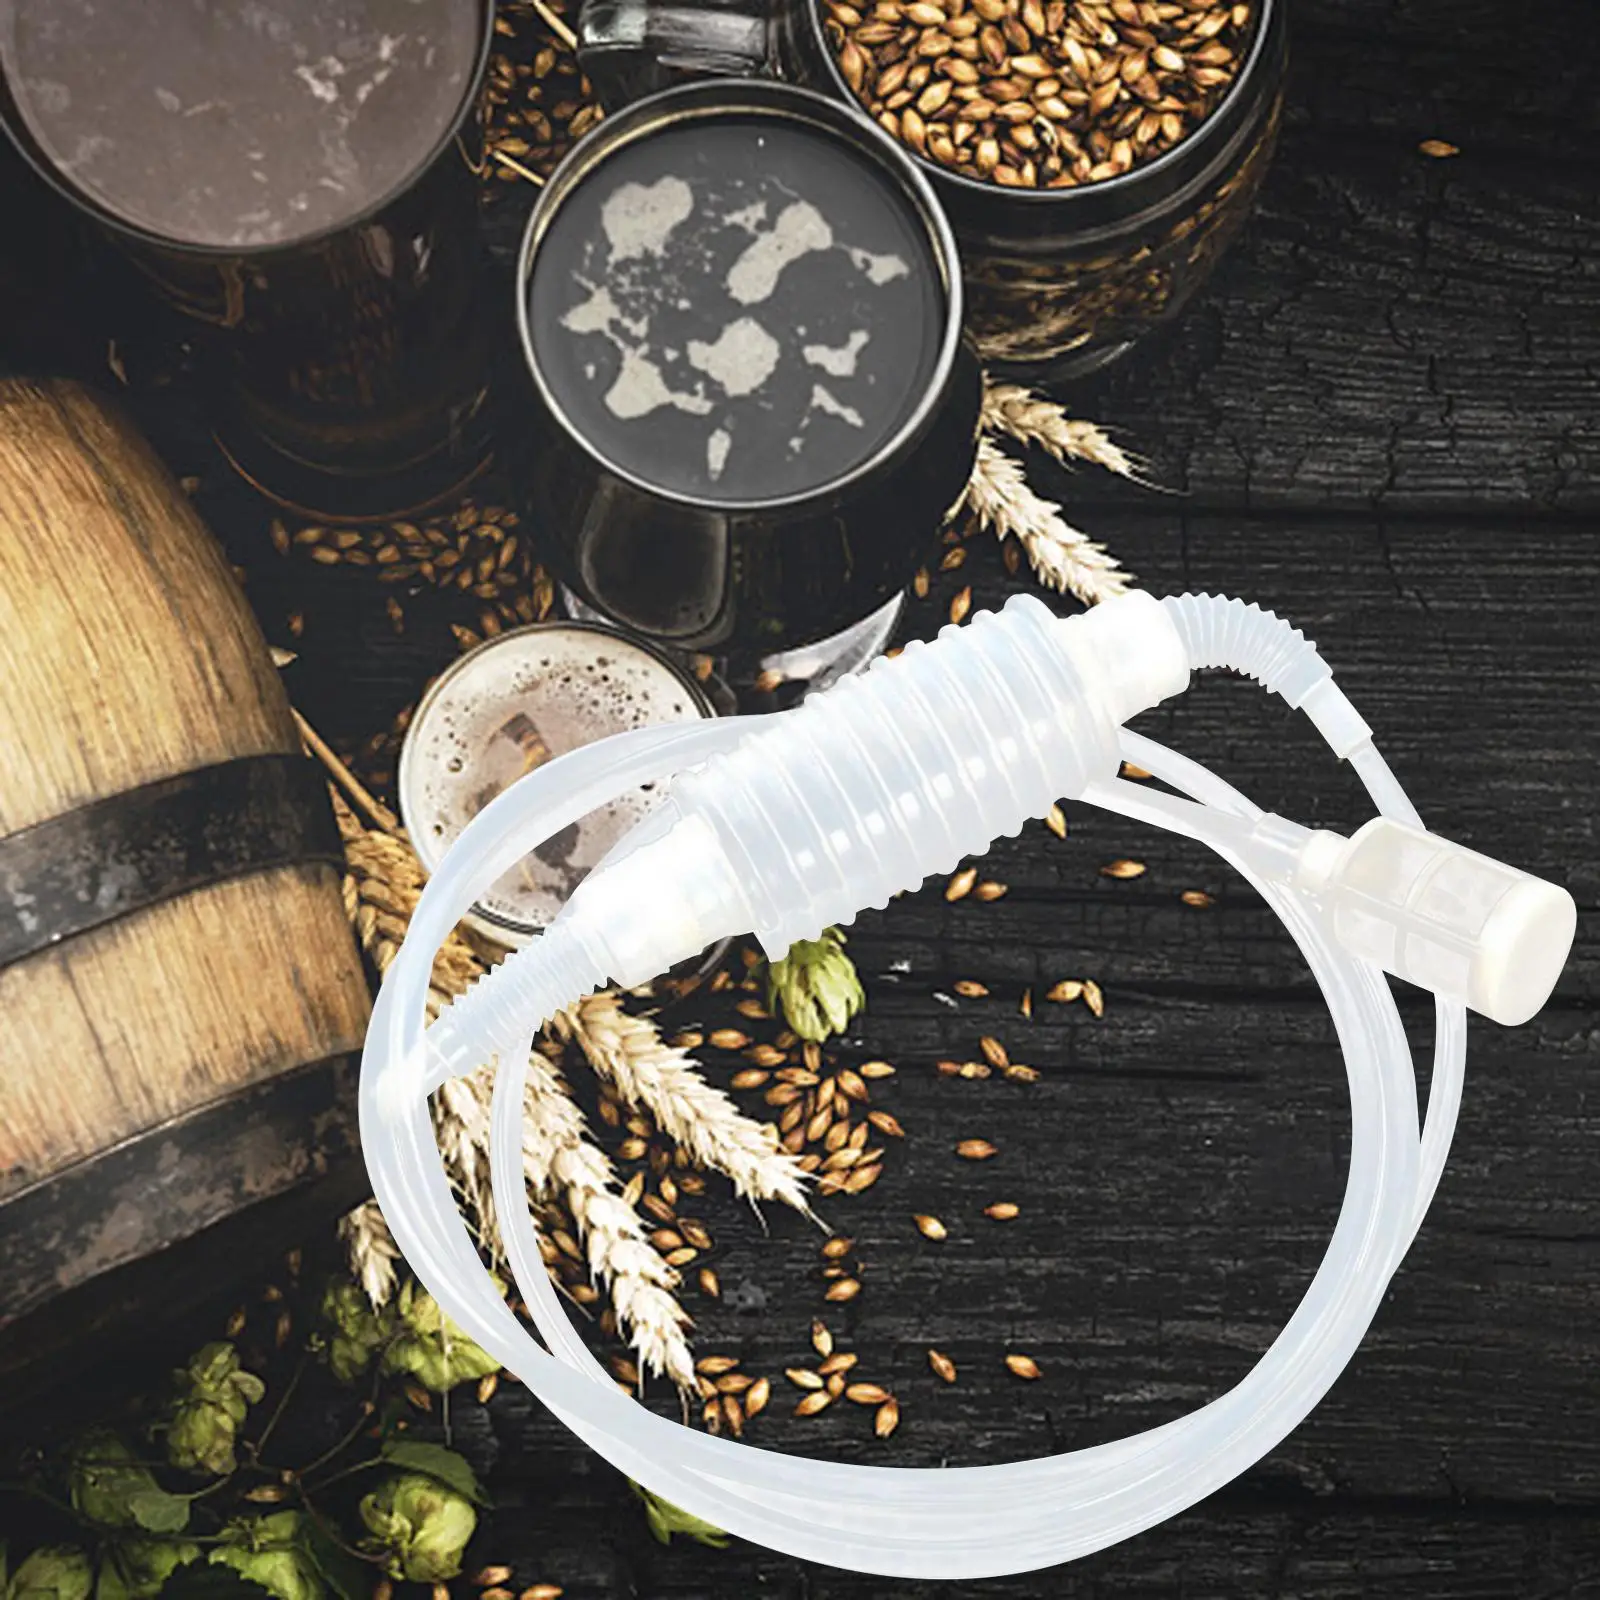 Syphon Pump Siphon Pipe Hose Filter Brewing Equipment Homemade Wine Beer Making Tool